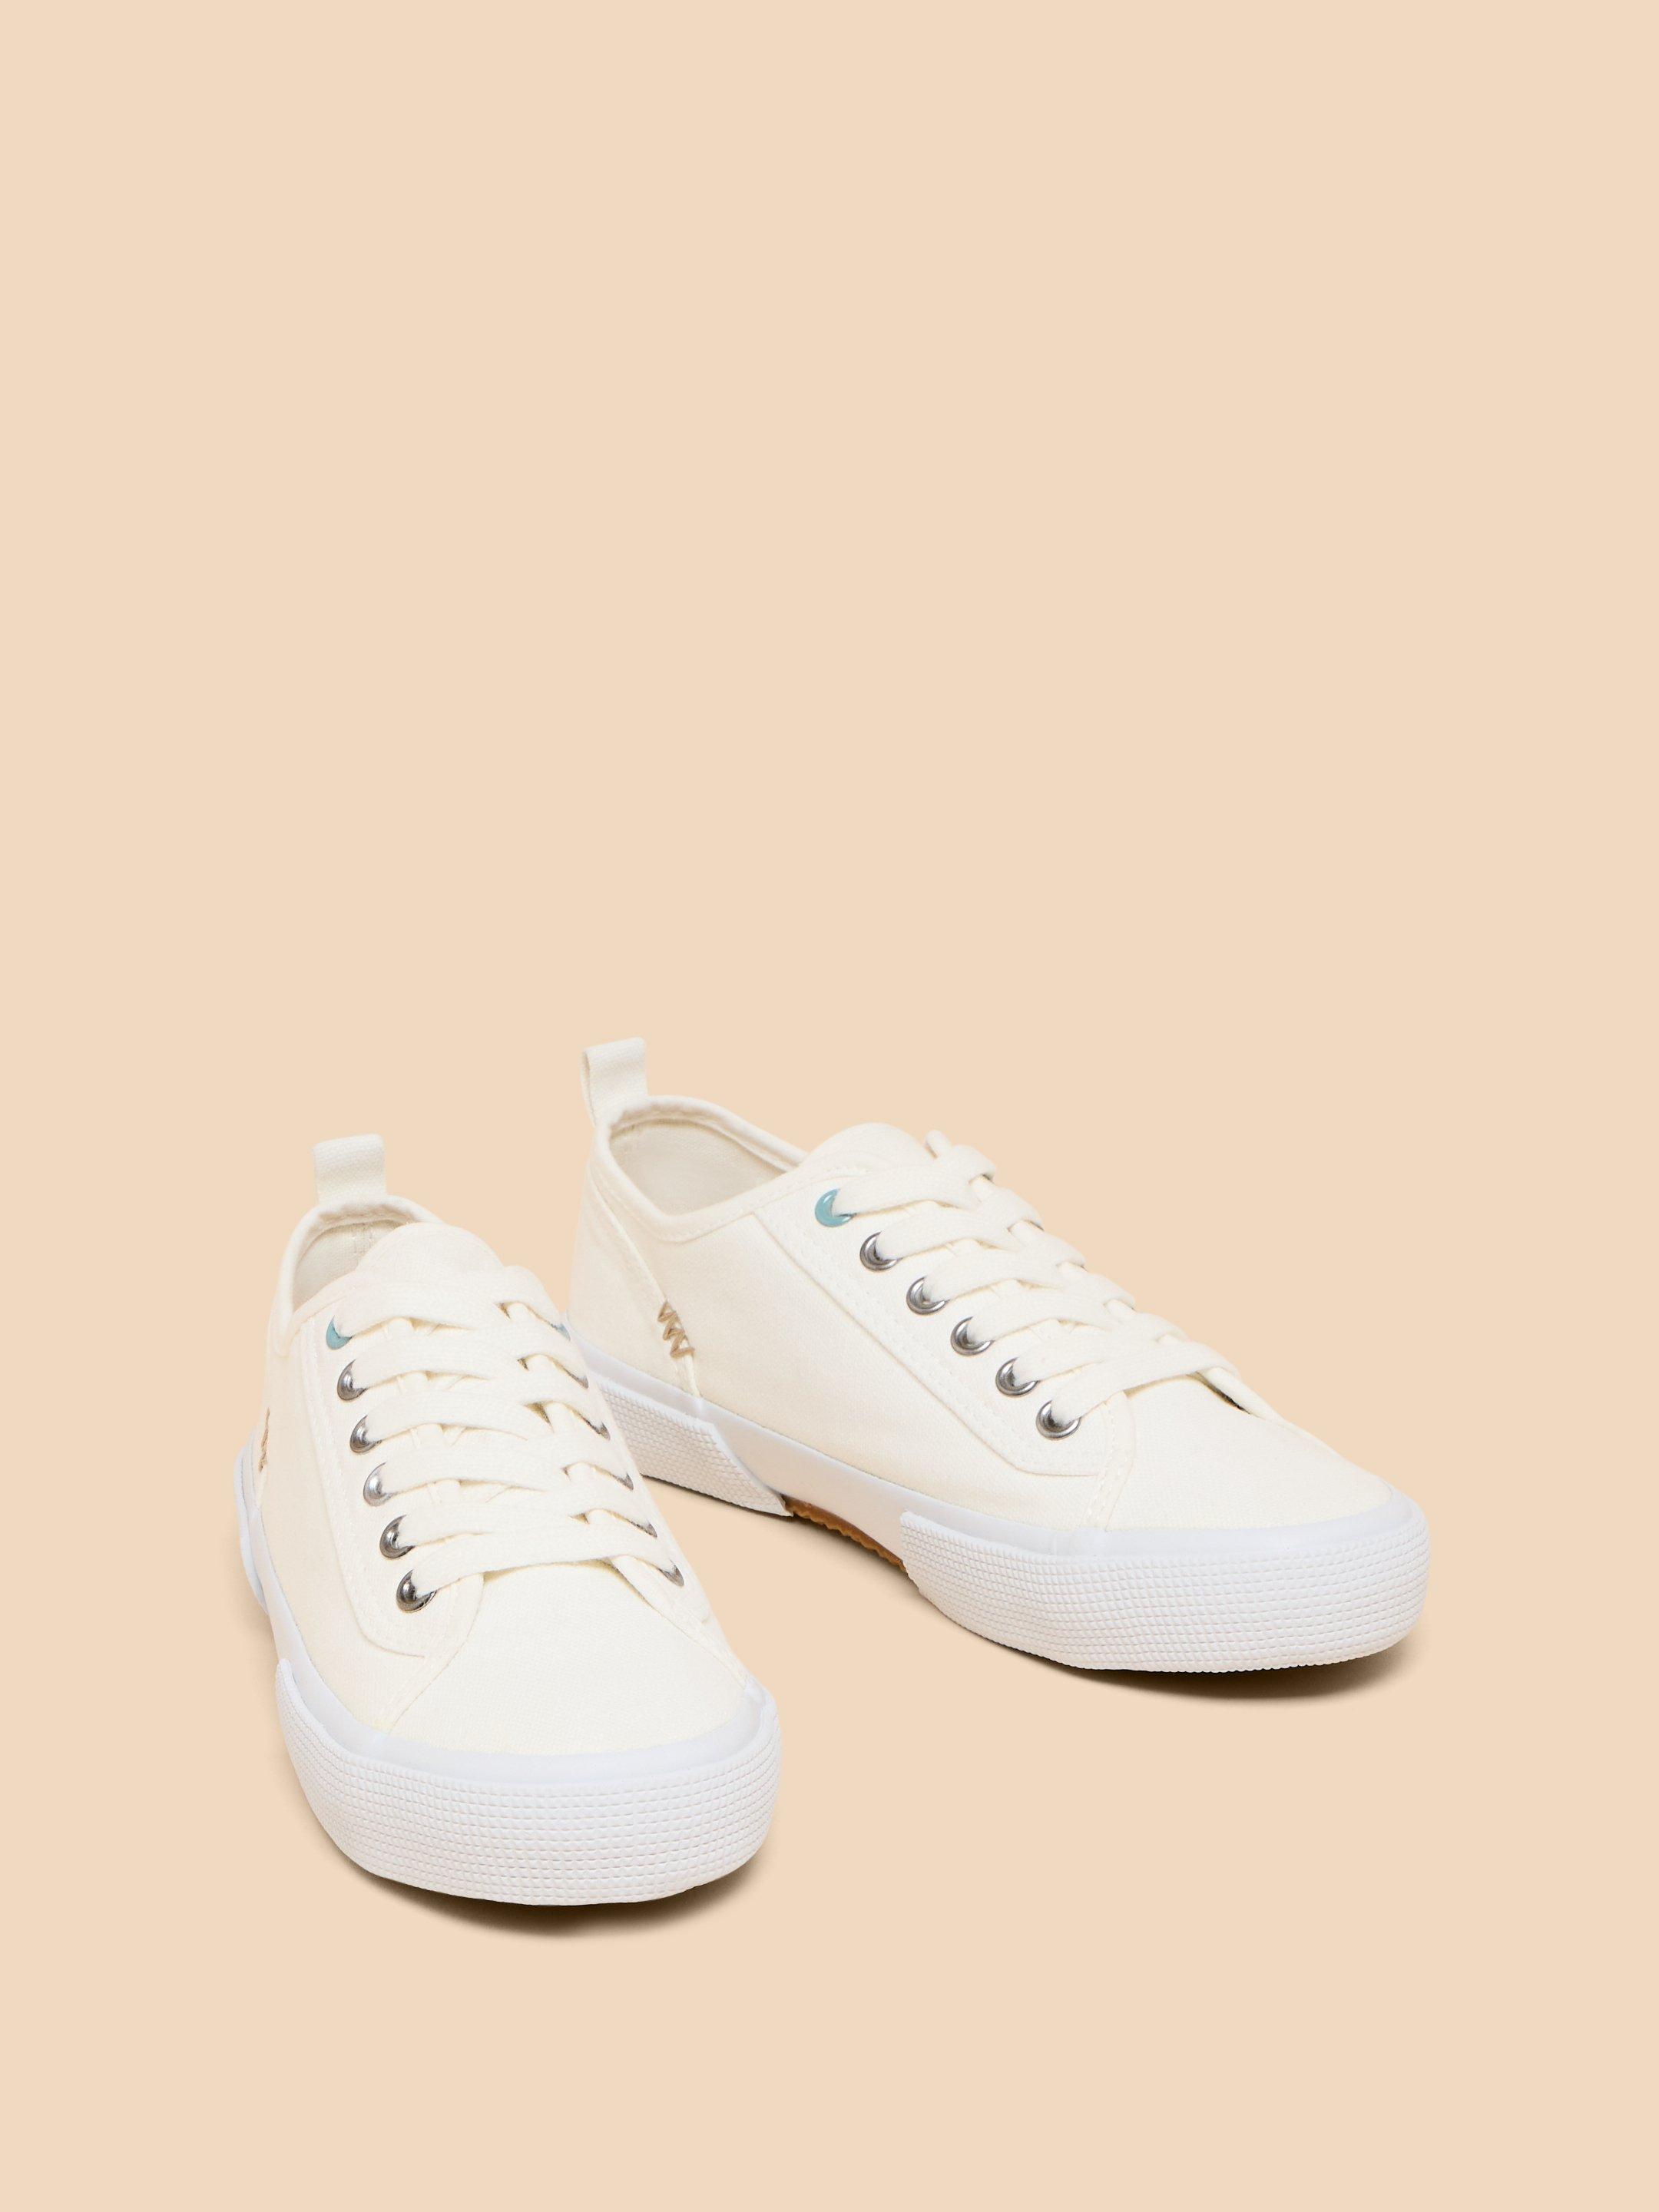 Pippa Canvas Lace Up Trainer in BRIL WHITE - FLAT FRONT